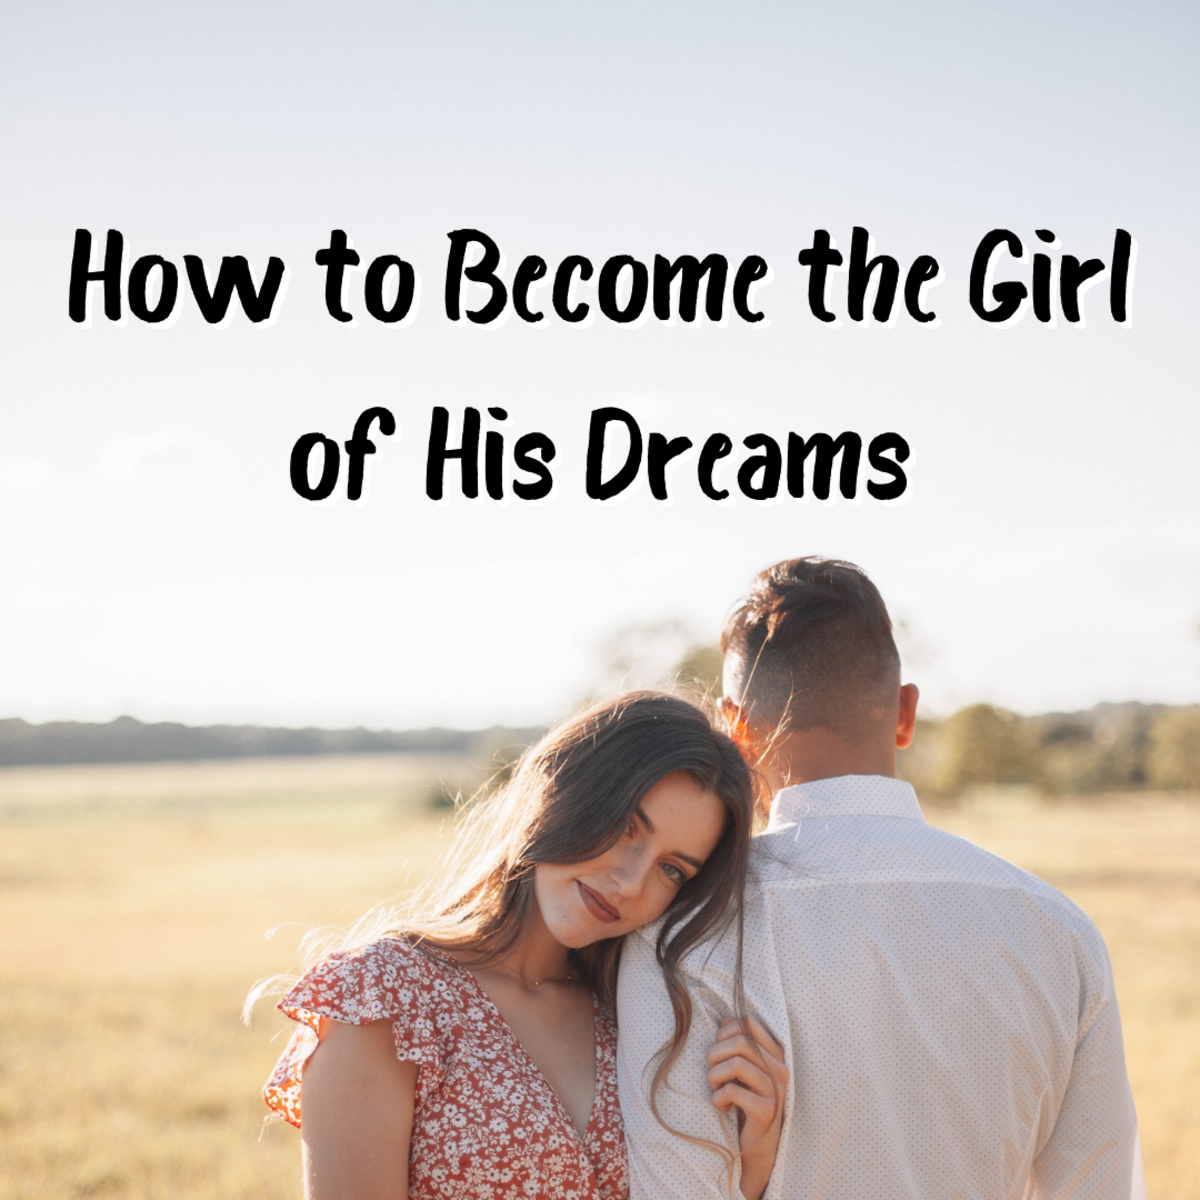 Learn 5 simple things you can implement in your life relationship to become the girl of his dreams.